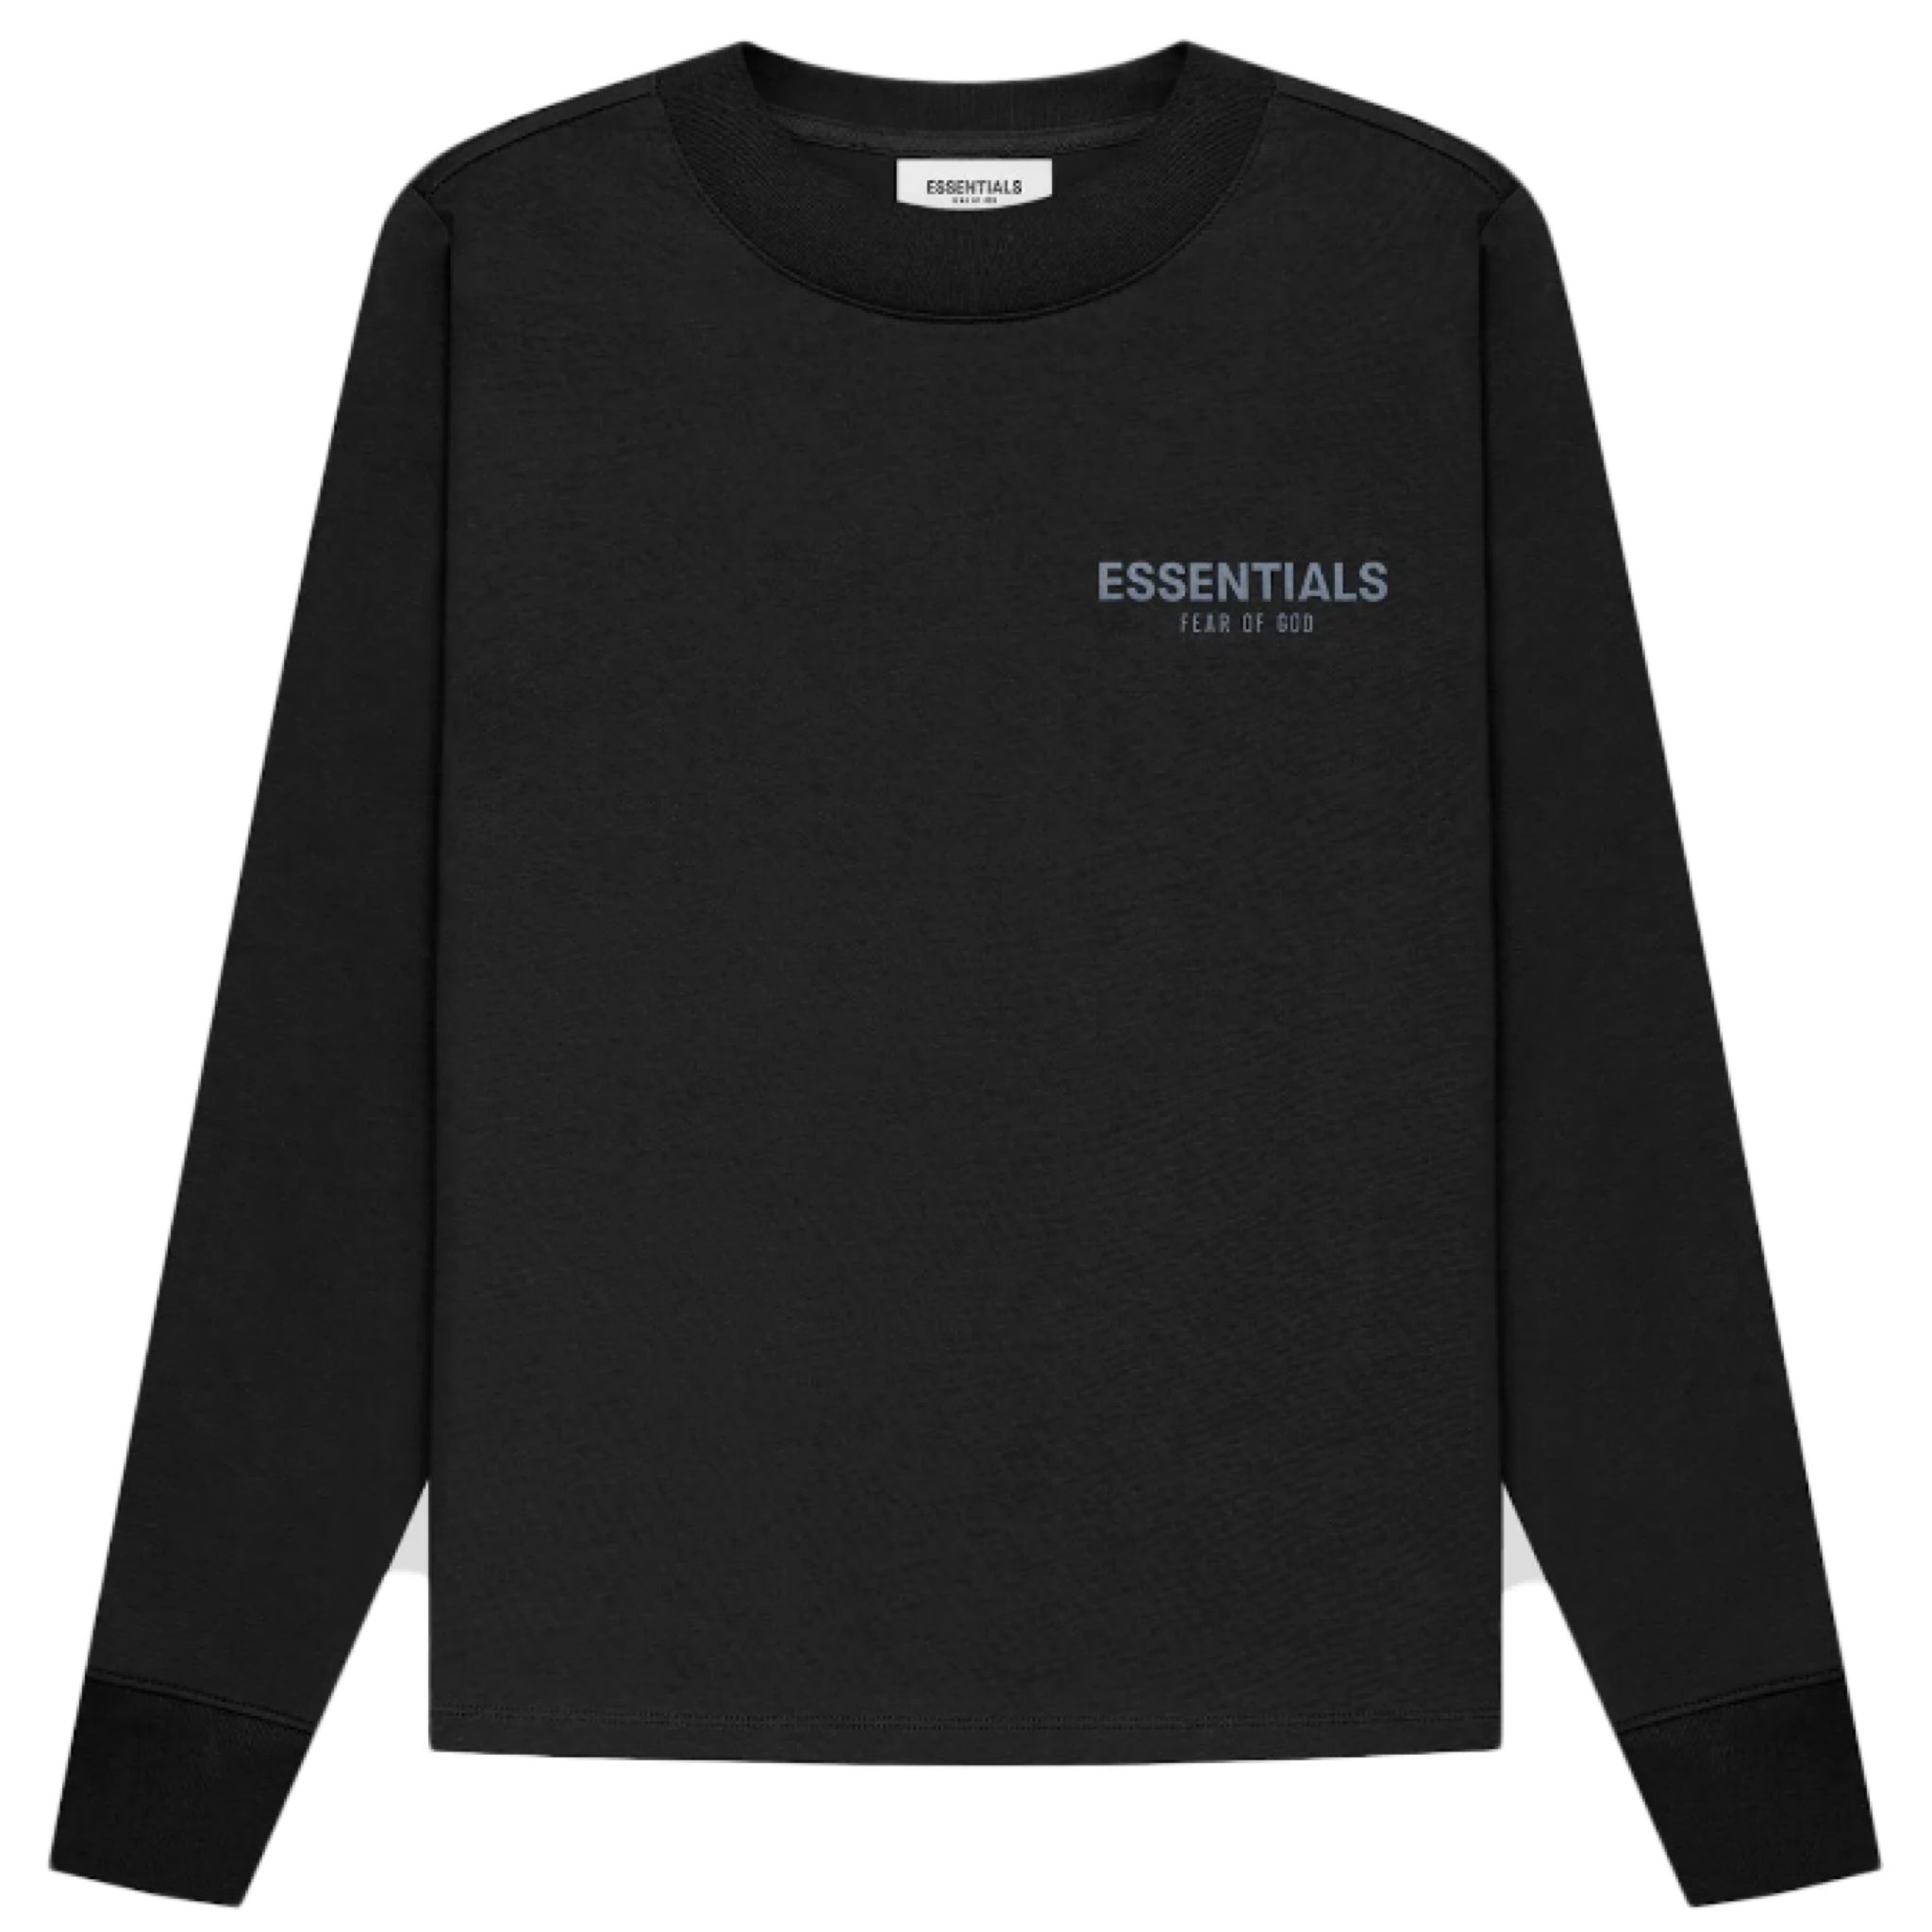 Fear of God Essentials Long Sleeve Limo Black